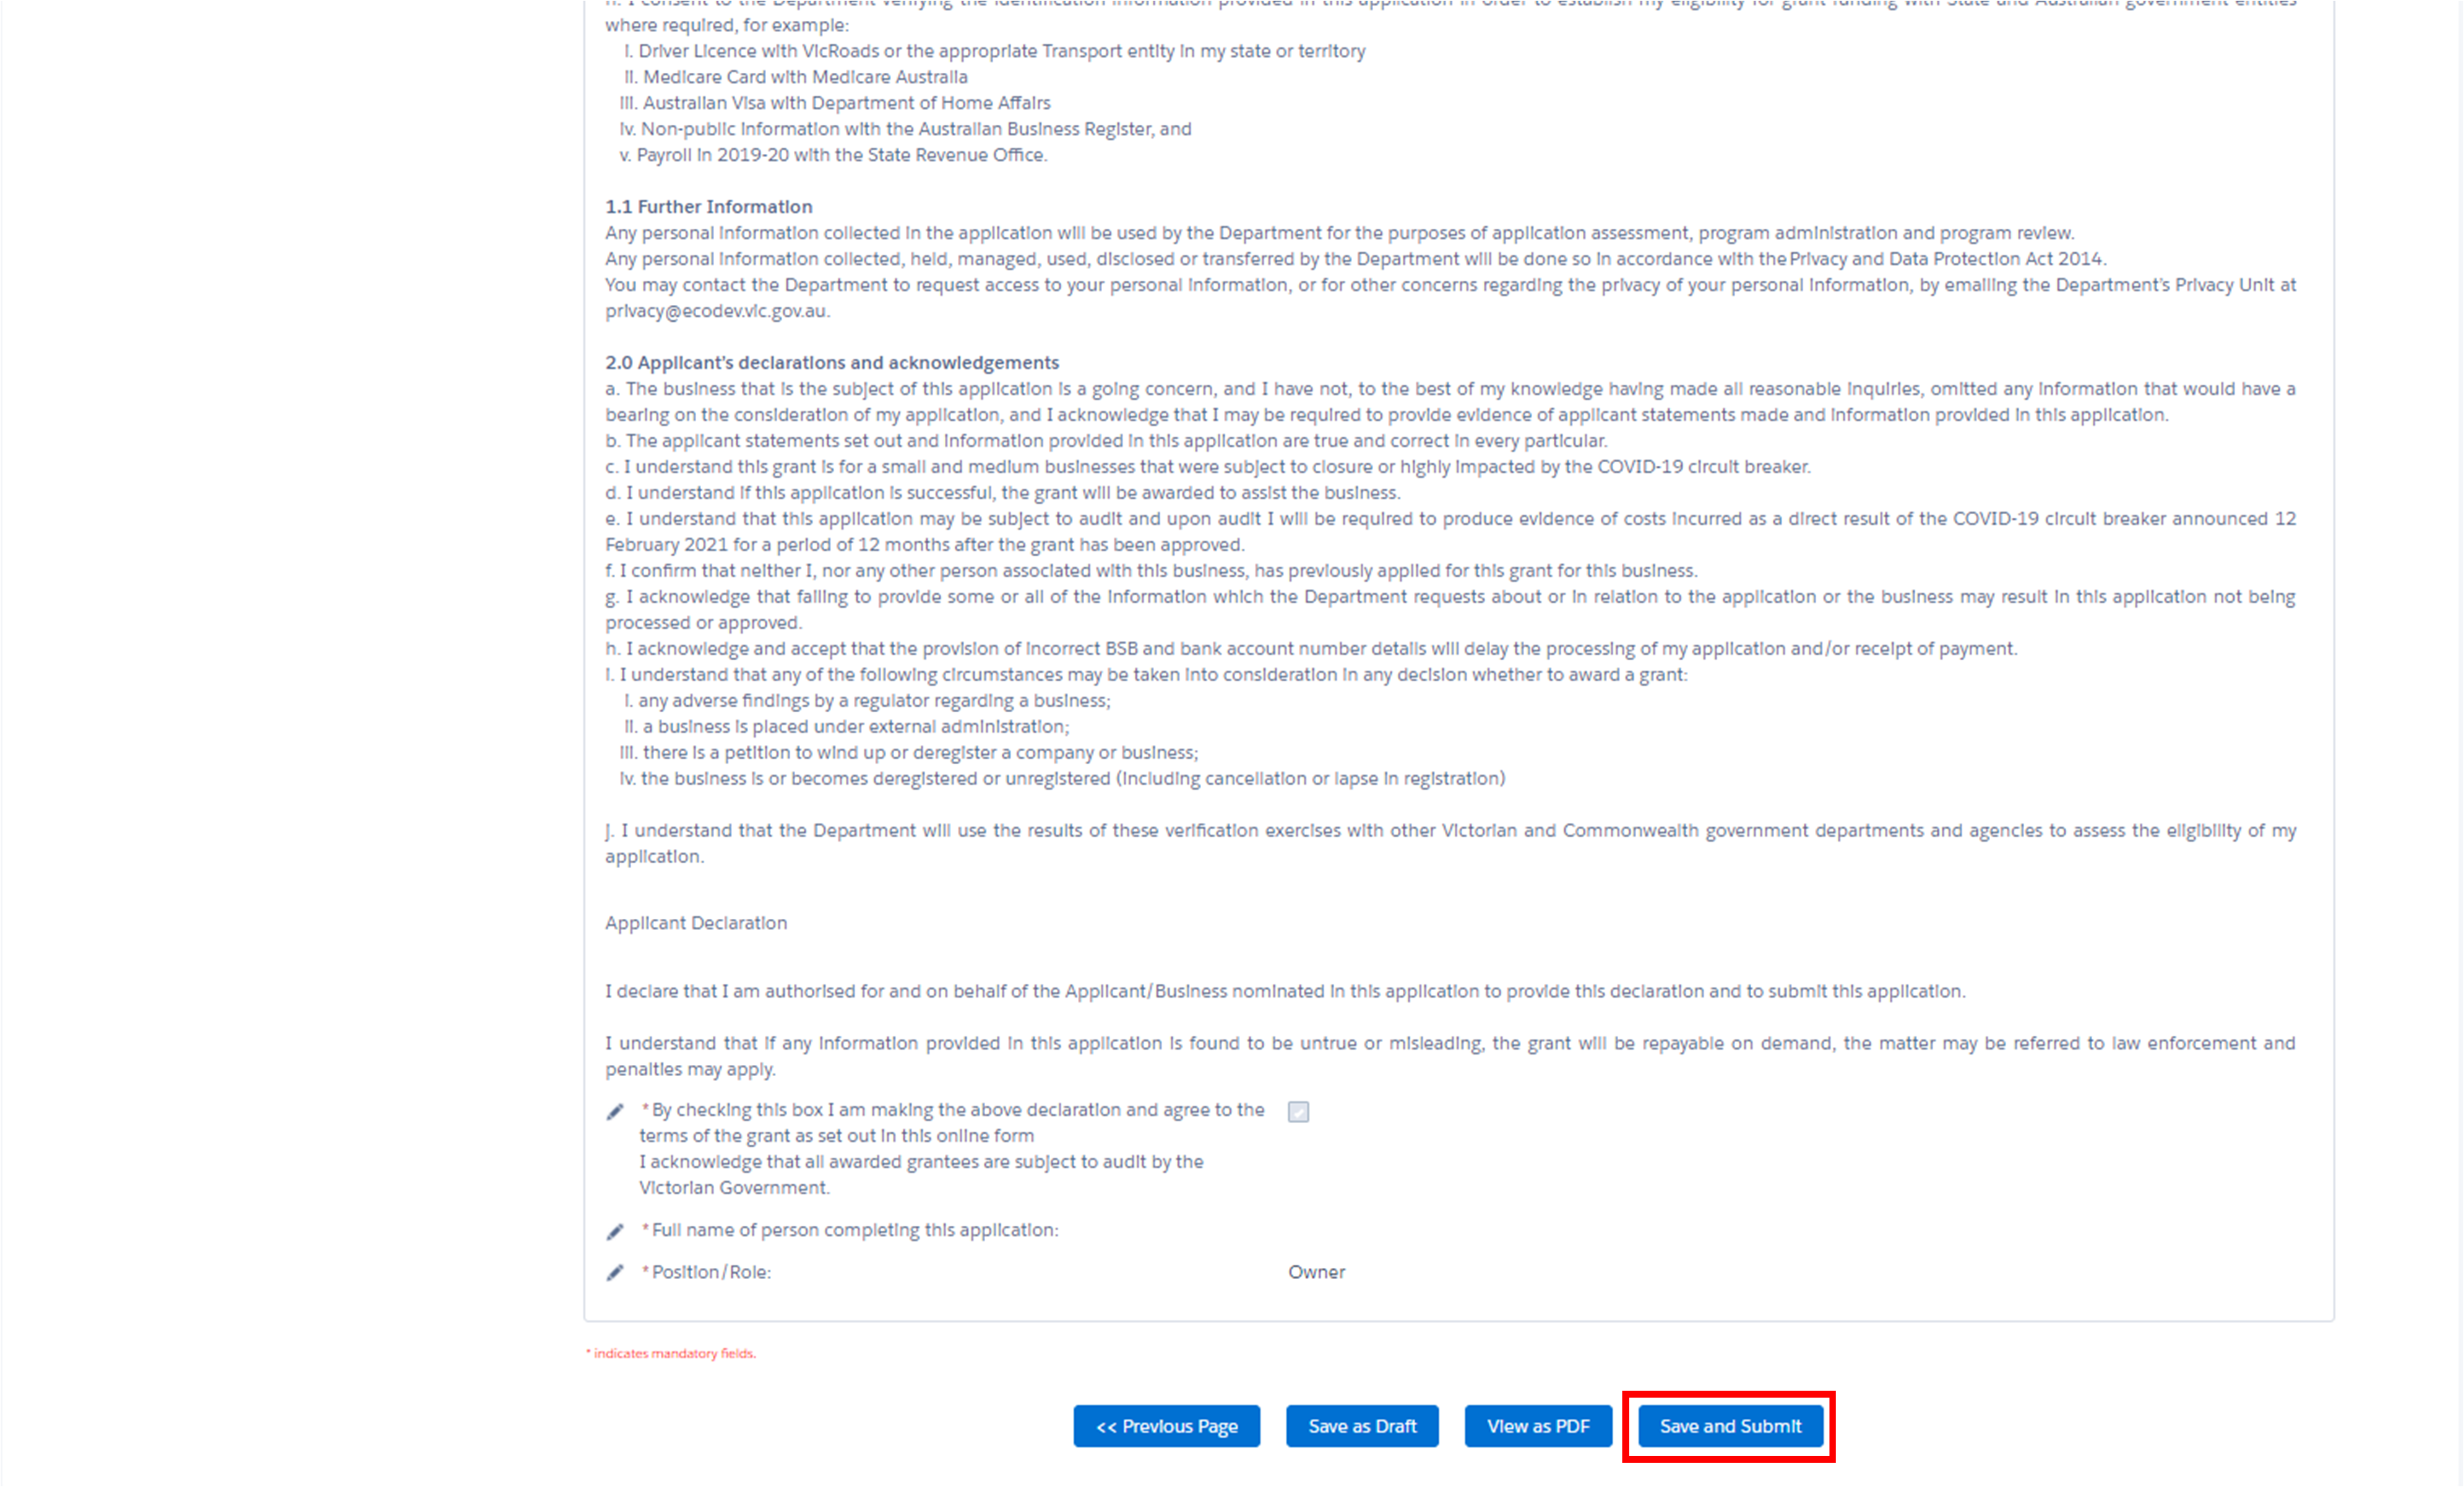 Image 6 shows a screenshot of the application declaration screen the user finds when submitting new identification documents. Full text is available in the grants portal. At the bottom of screen a "Save and submit" button is highlighted in a red box.